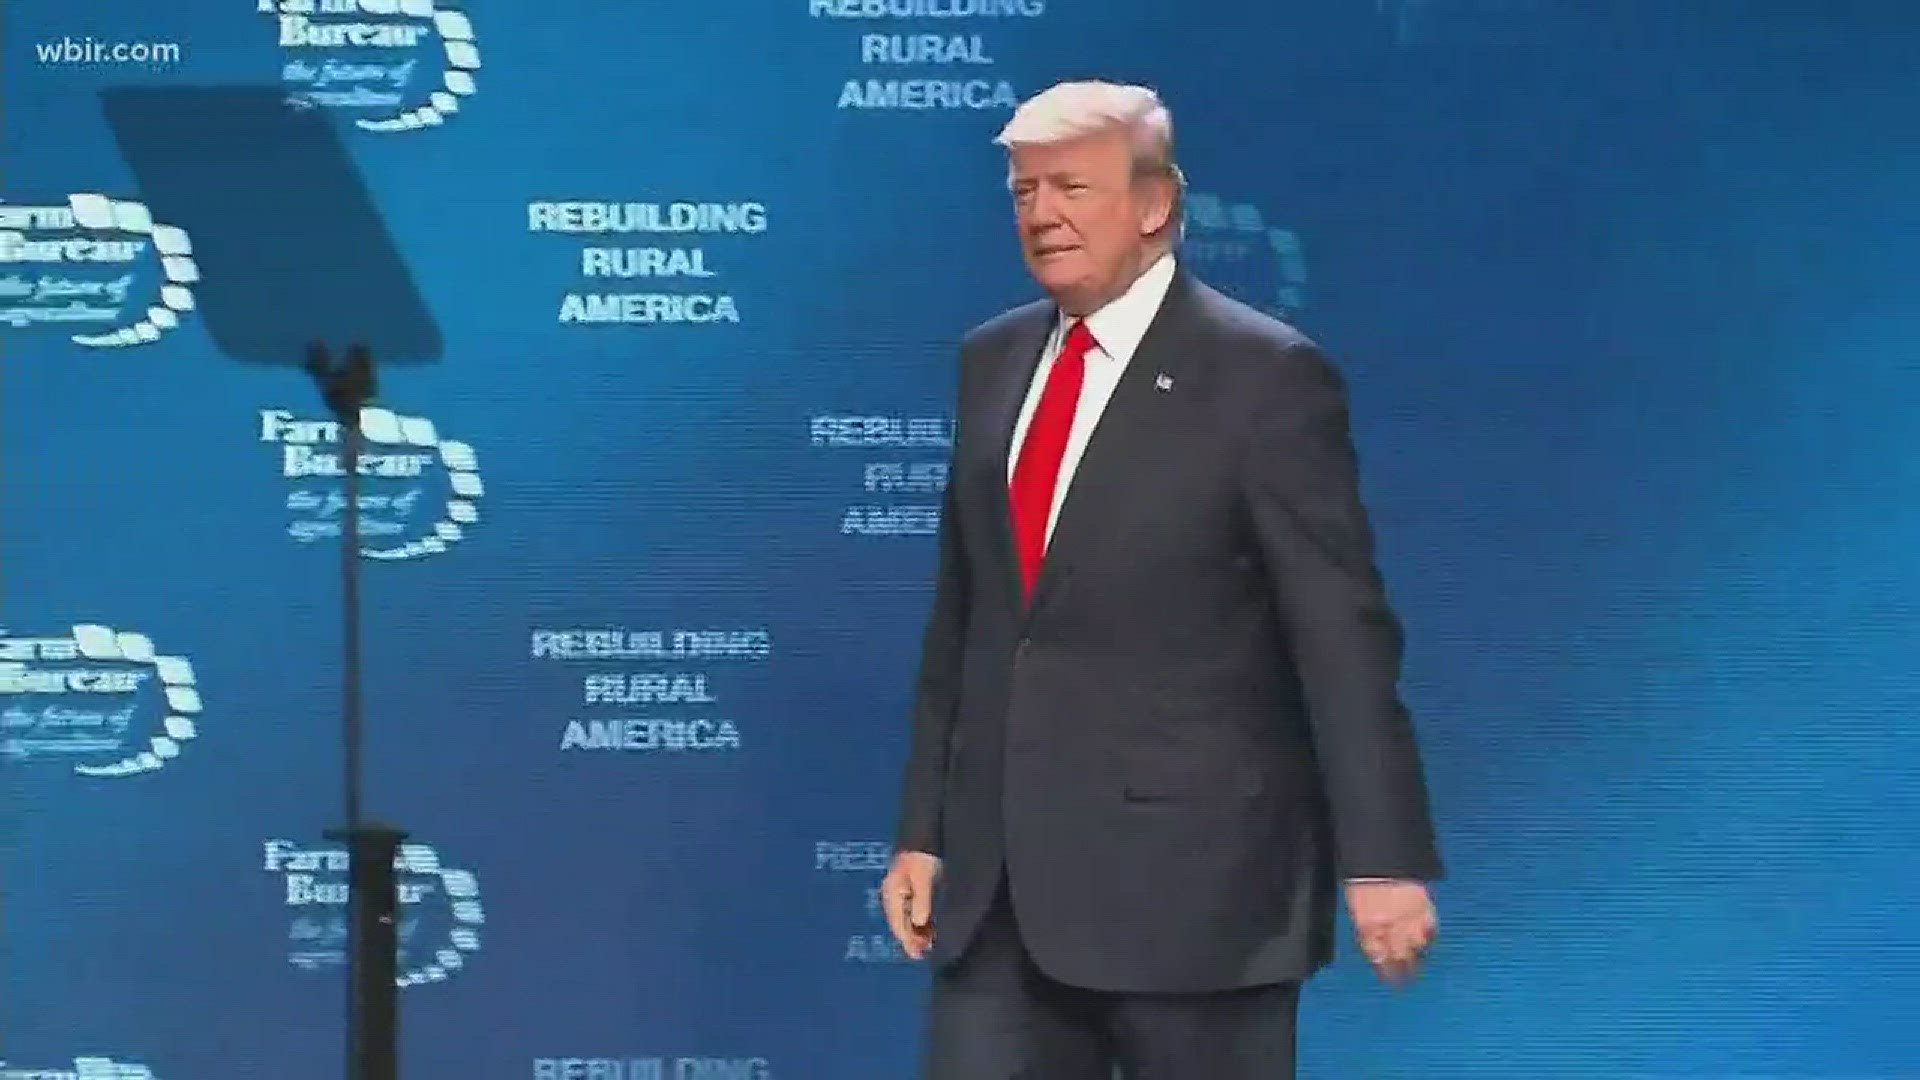 Jan. 8, 2018: President Donald Trump made a stop in Nashville to talk to farmers about the economy at the American Farm Bureau Federation's annual conference.